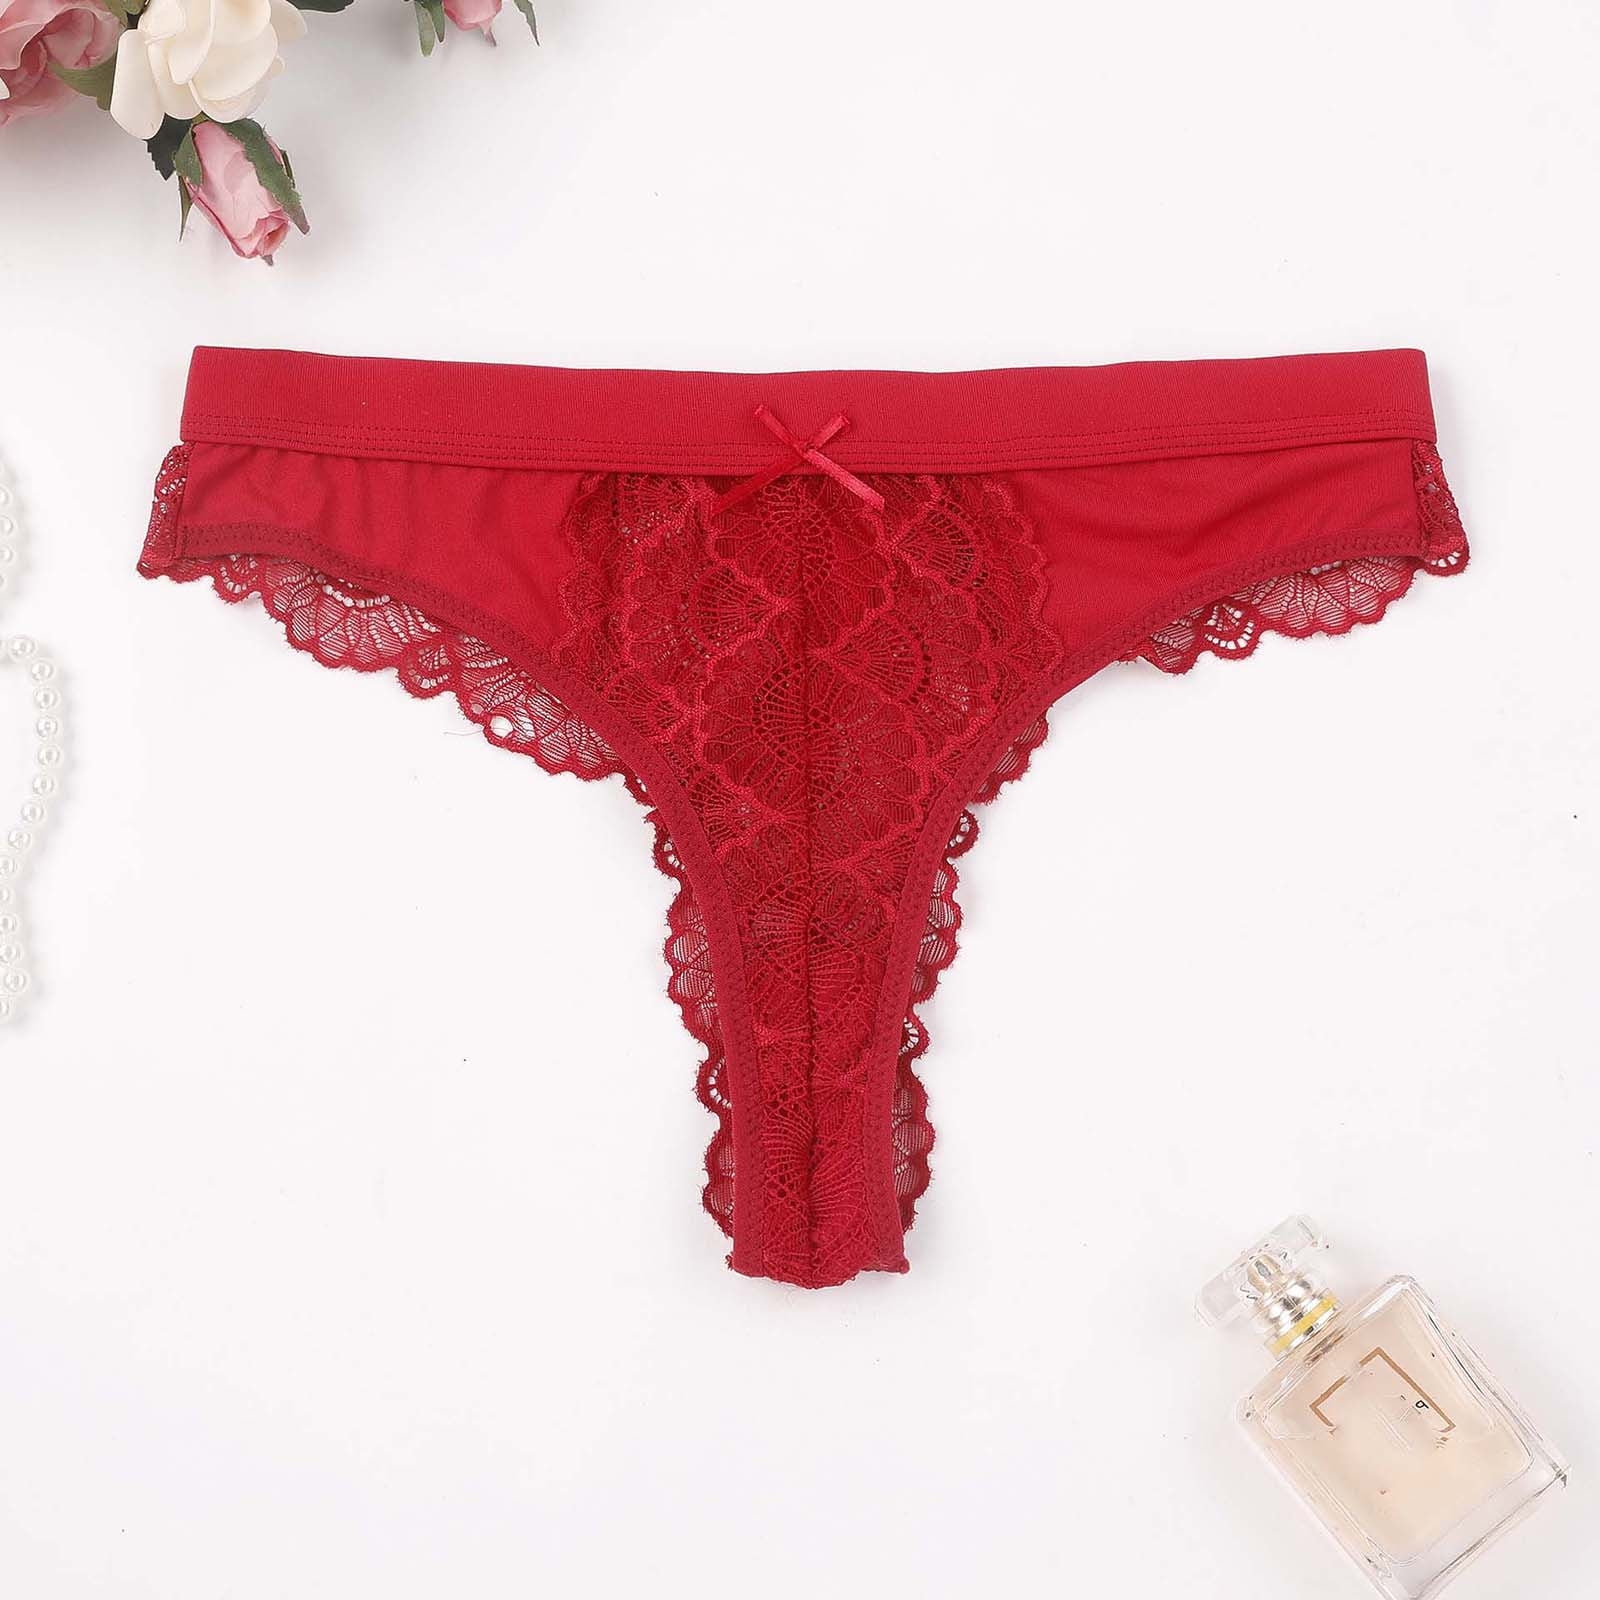 Efsteb Women's Thongs G Thong Lingerie Transparent Breathable Underwear  Ropa Interior Mujer Sexy Comfy Panties Low Waist Briefs Embroidery Lace  Panties Red 